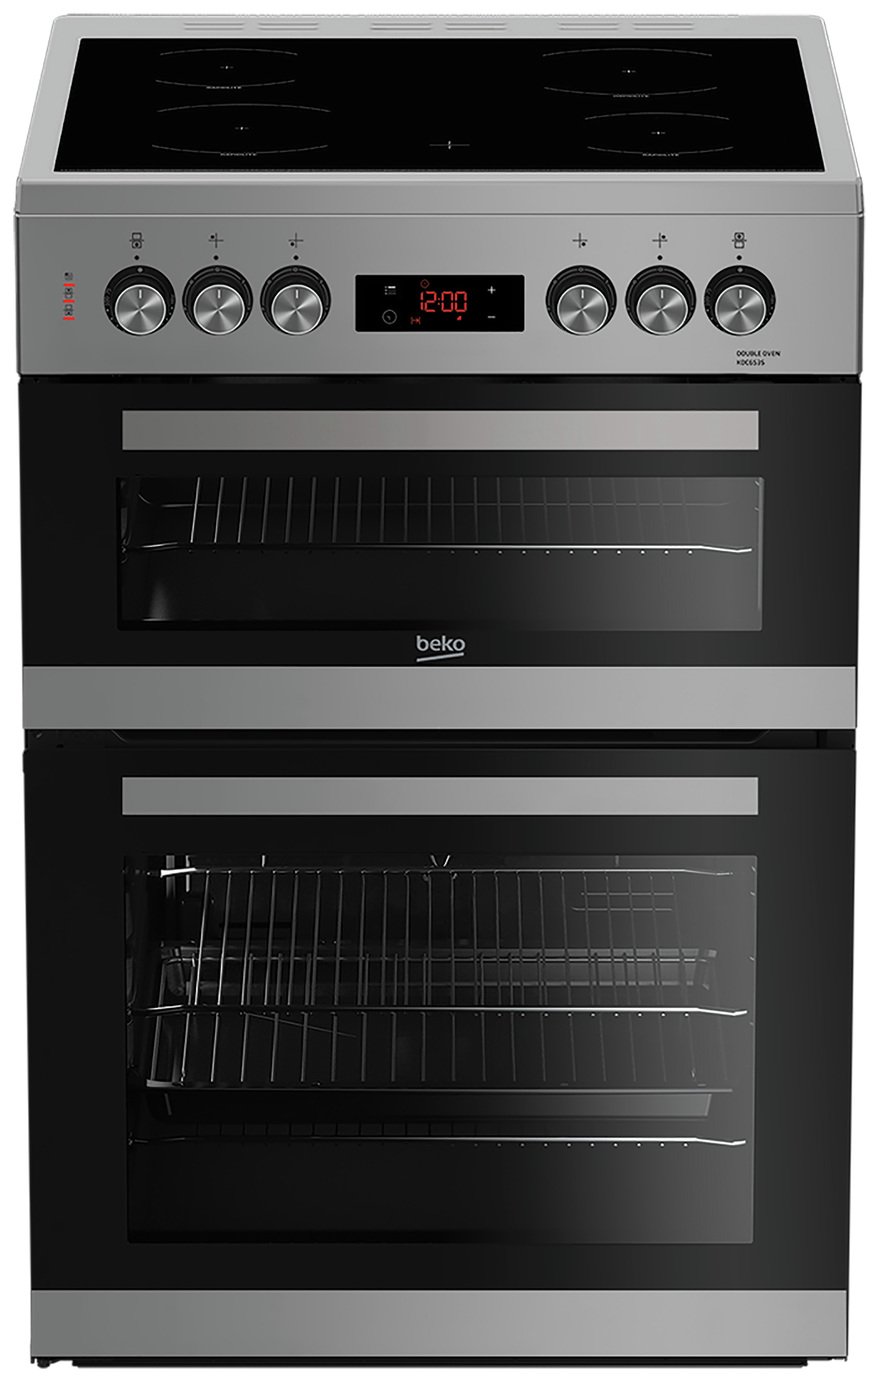 500 electric cooker